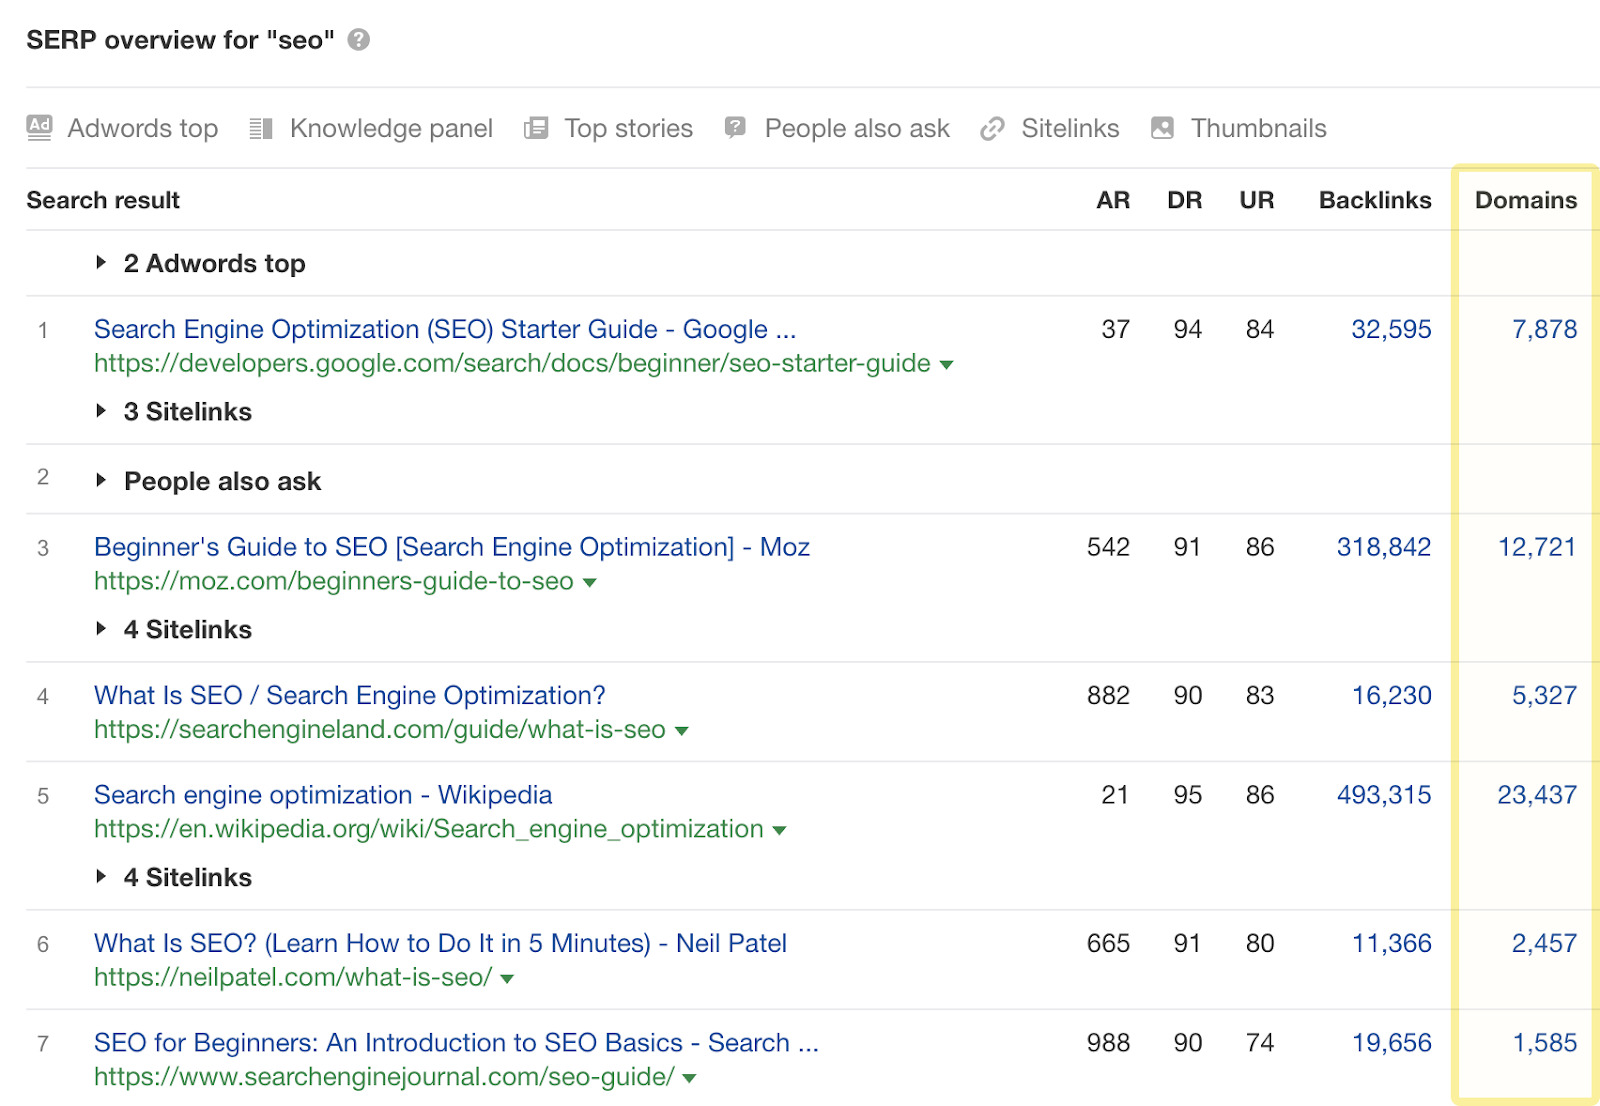 SERP overview for "seo" short form long form content